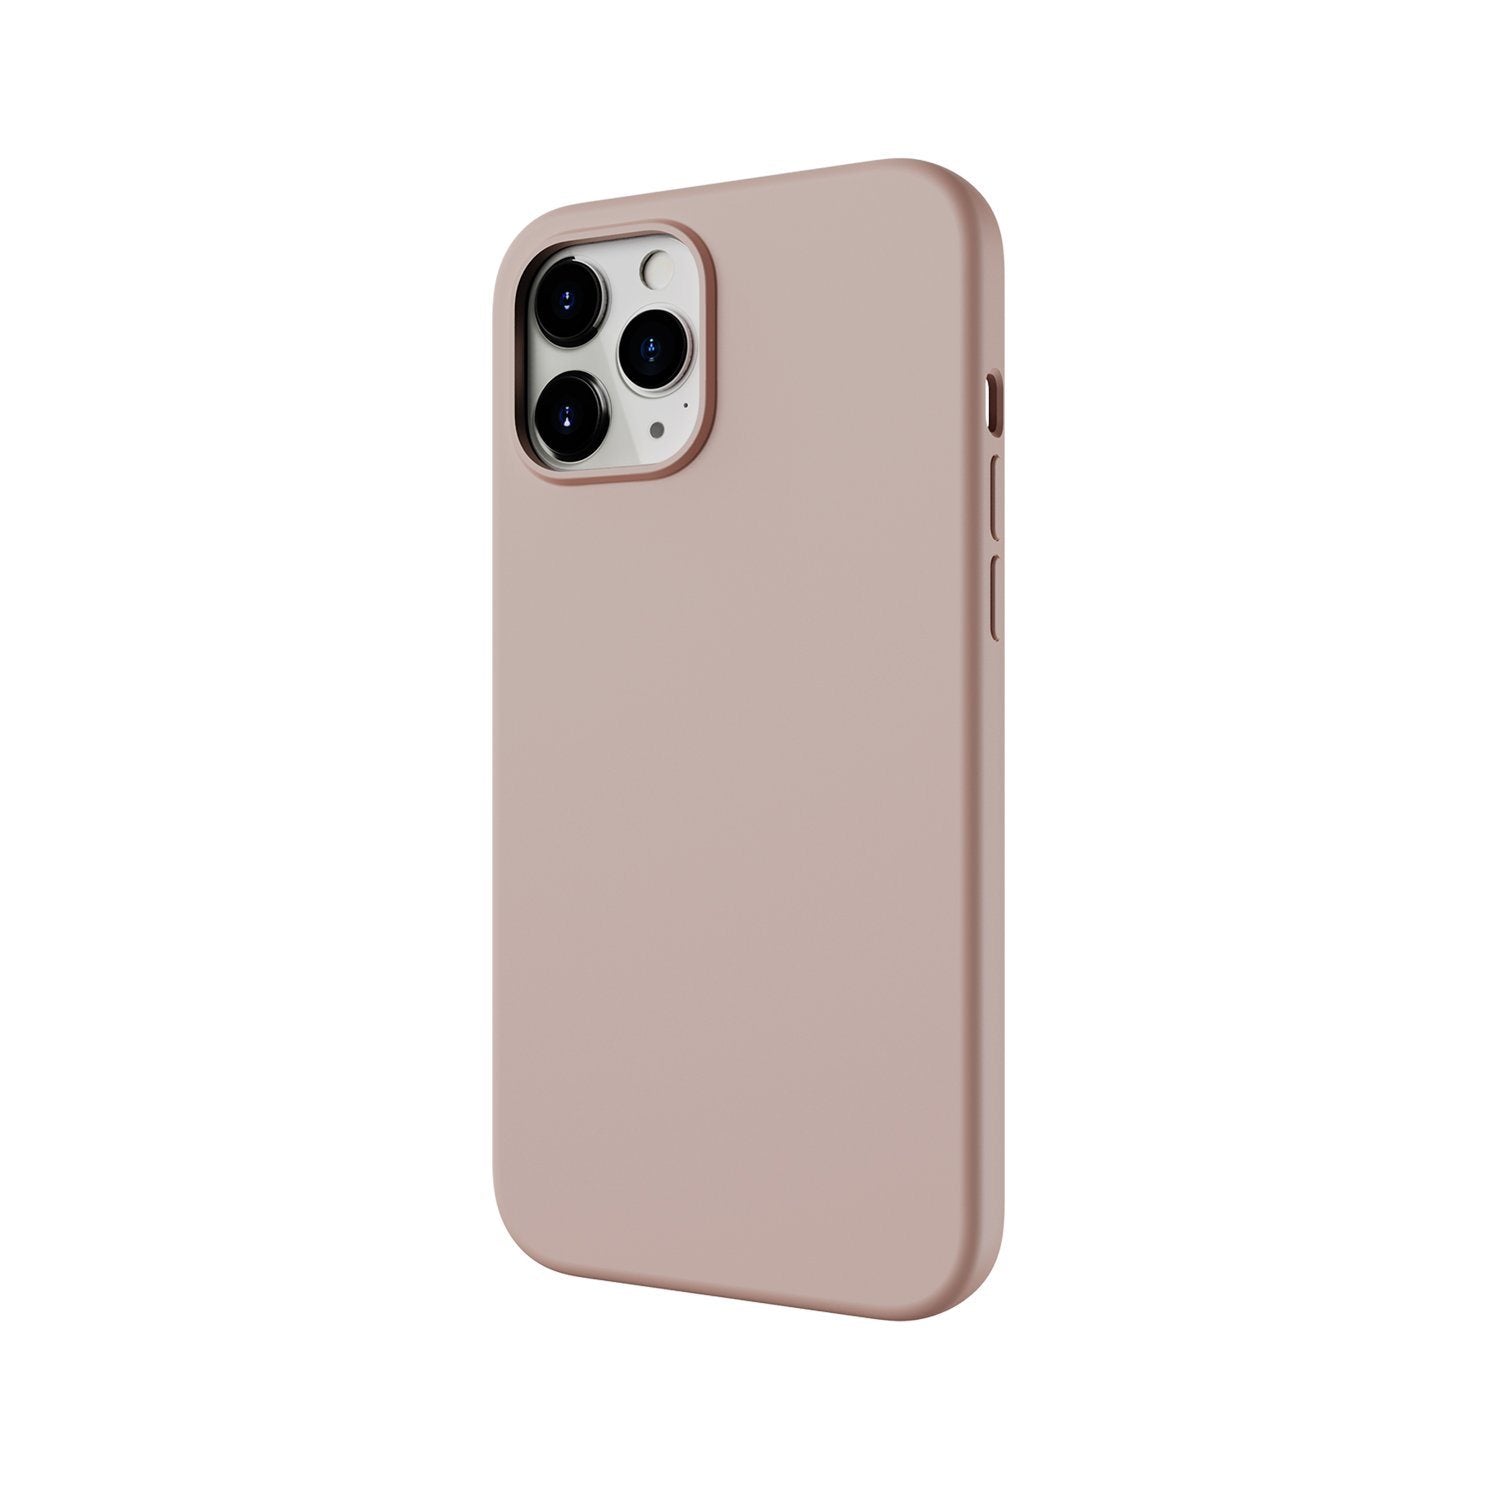 Switcheasy Skin Case for iPhone 12 Pro Max 6.7"(2020), Pink Sand Default Switcheasy 